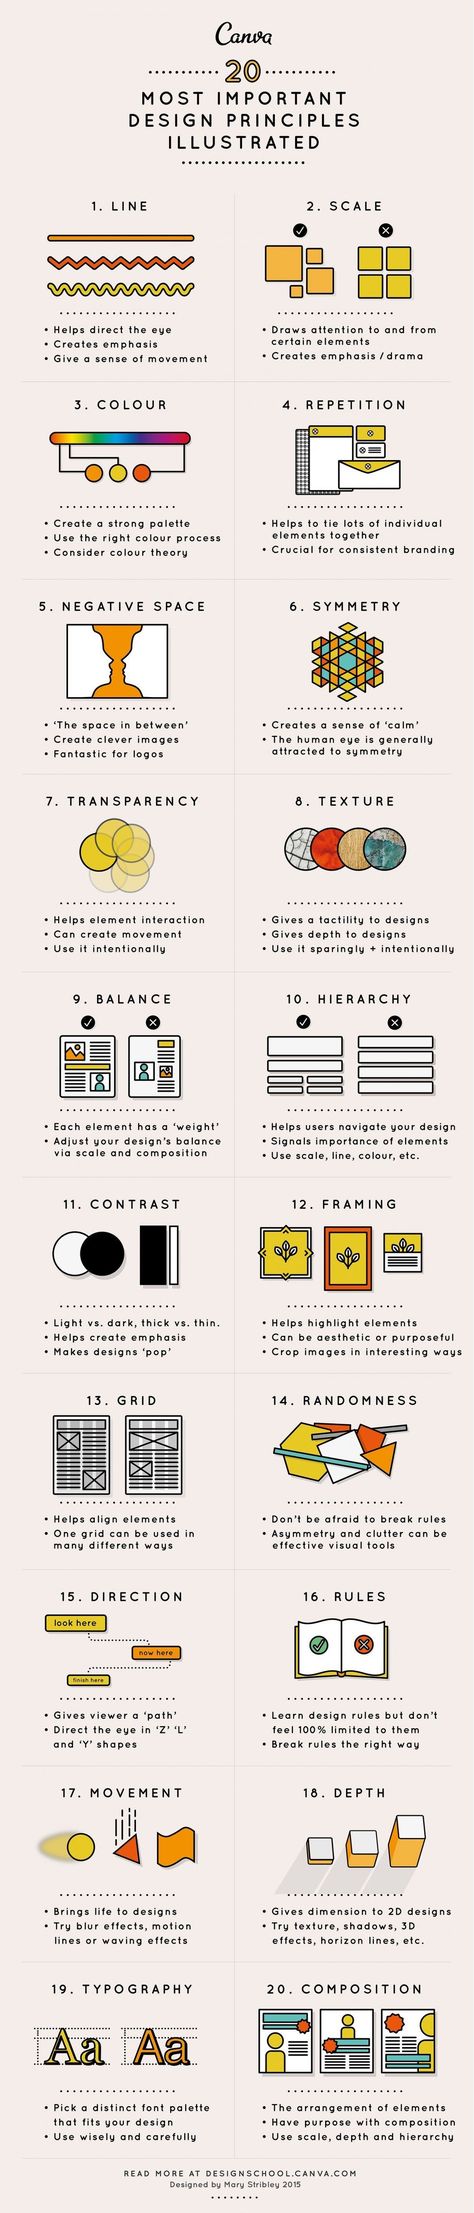 The 20 Most Important Design Principles Illustrated [Infographic] | Social Media Today Design De Configuration, Graphisches Design, Elements And Principles, Design Theory, Design Rules, Principles Of Design, Design Grafico, Graphic Design Tips, Brand Board